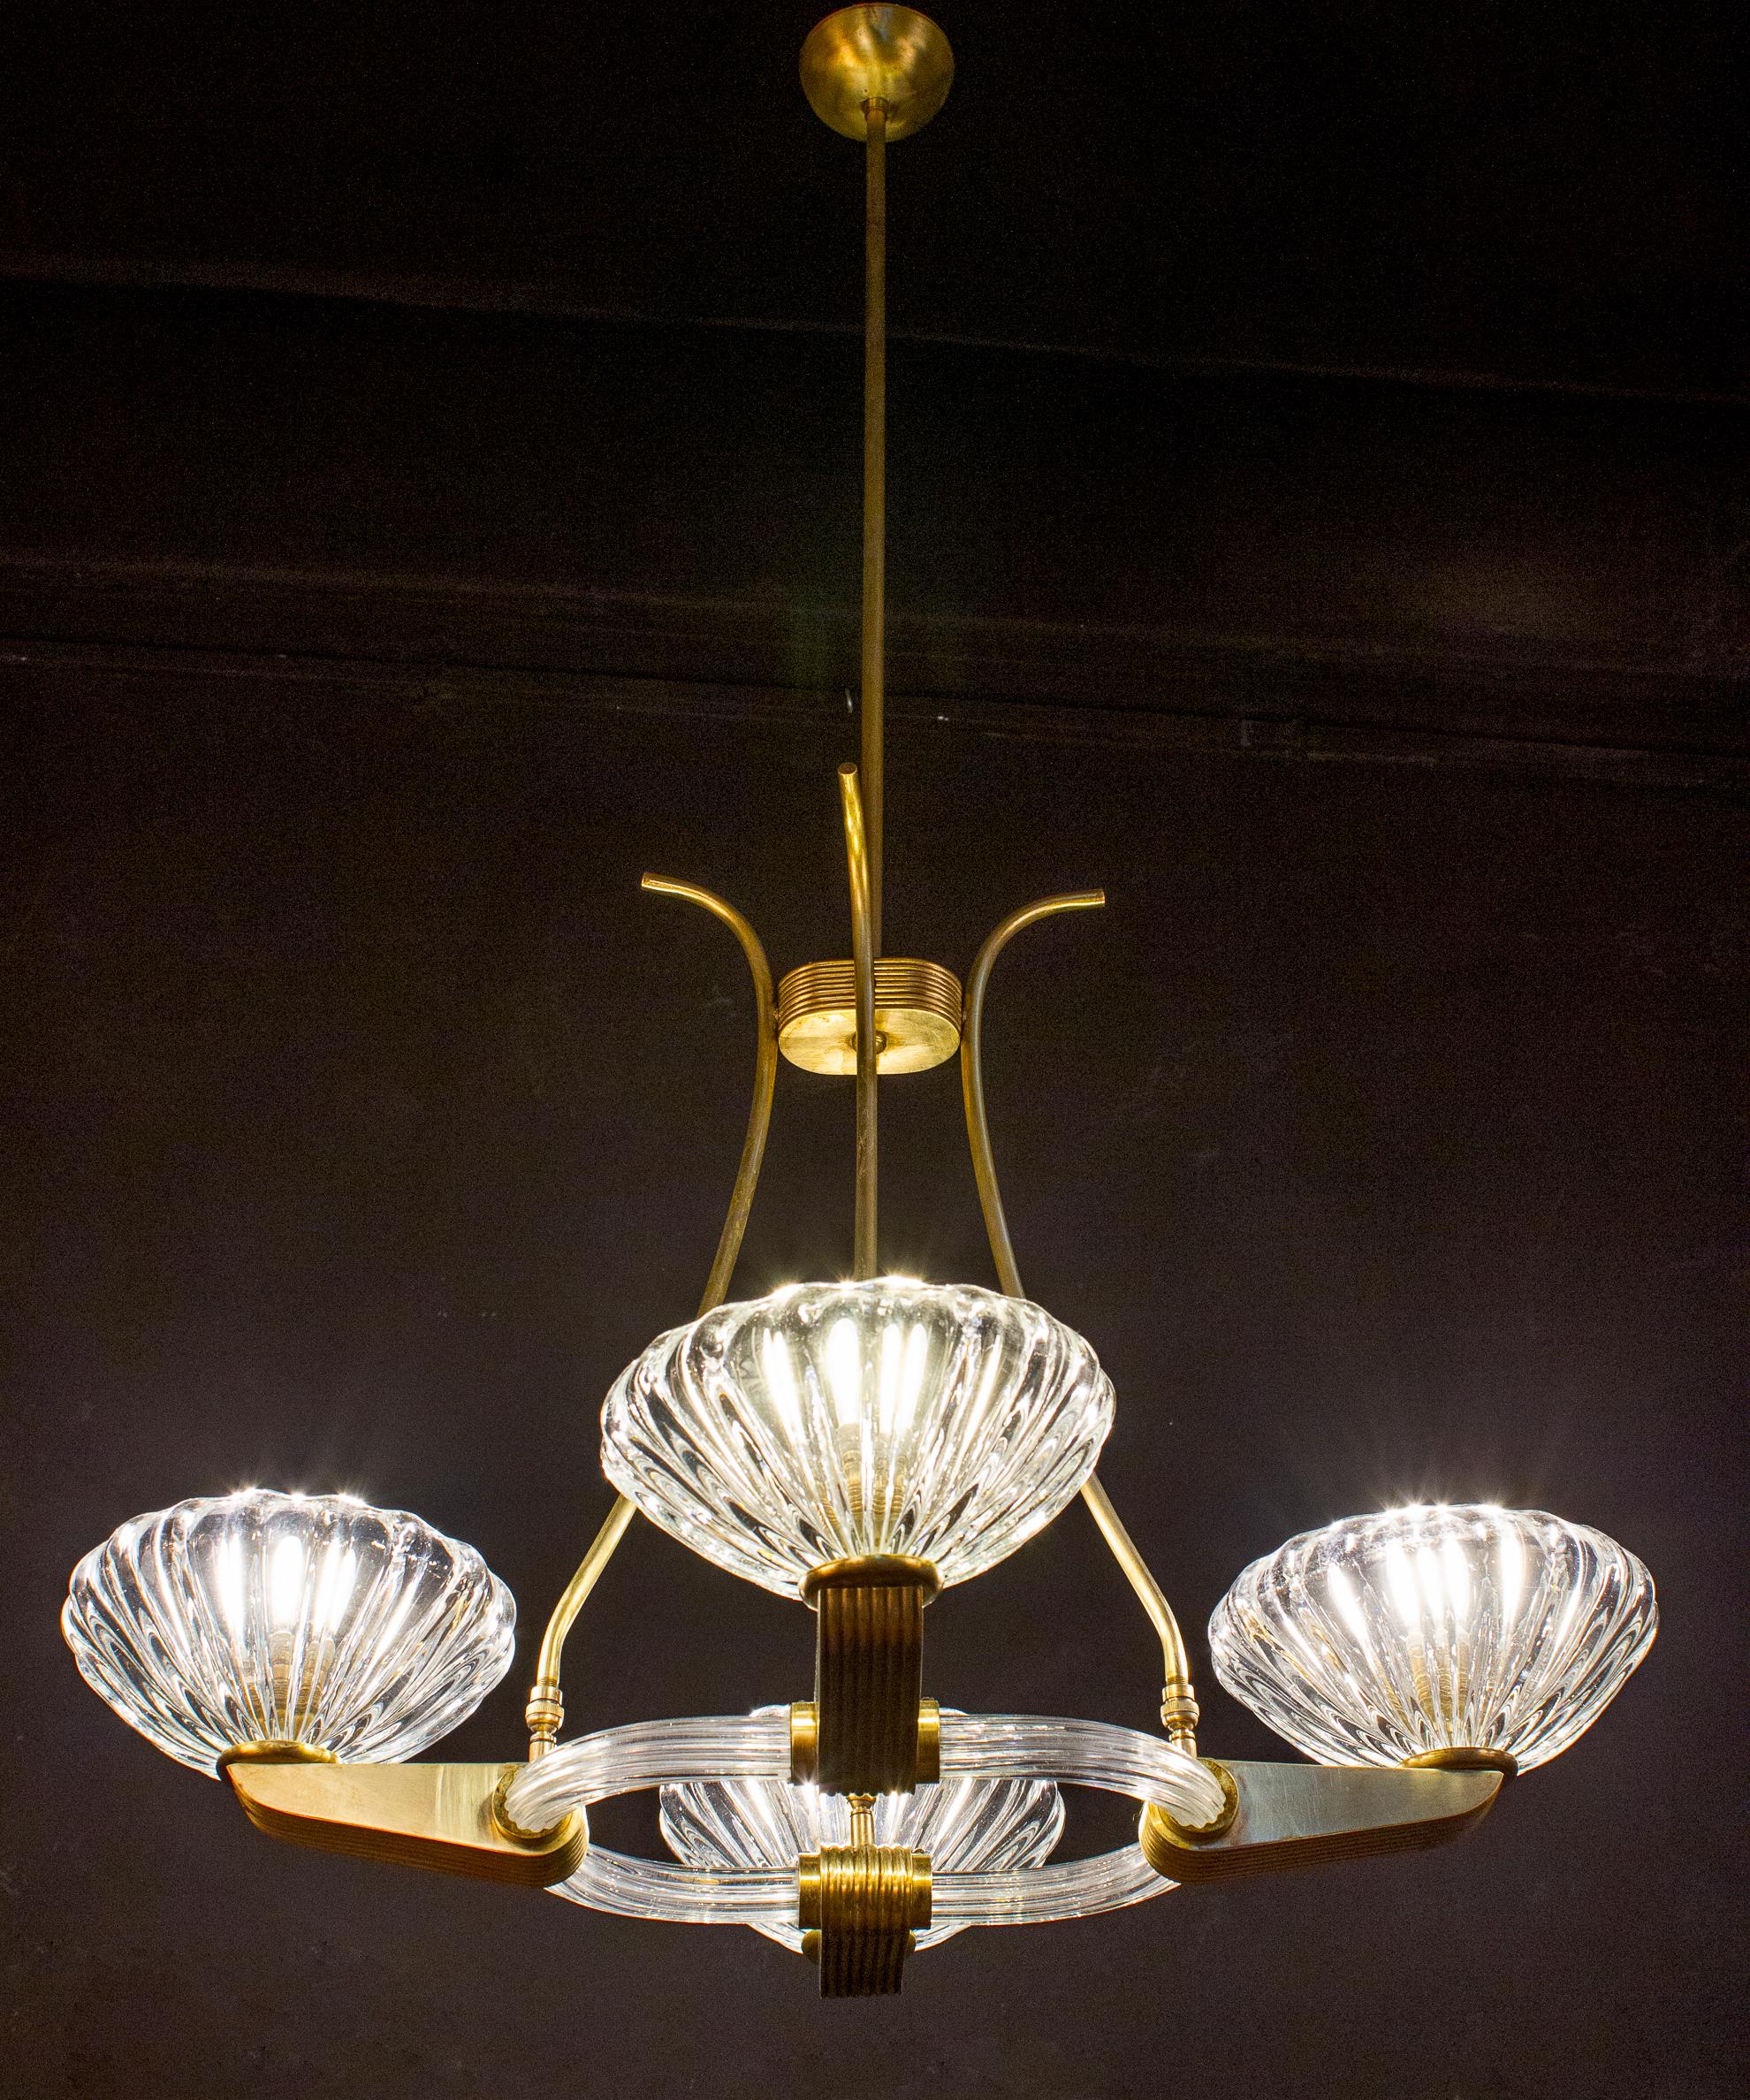 Elegant four-shade Murano glass chandelier with elegant shaped brass mount, by Ercole Barovier.
Excellent vintage condition.
Four E 27 light bulbs compatible with US standards.
The height of the brass rod can be shortened.